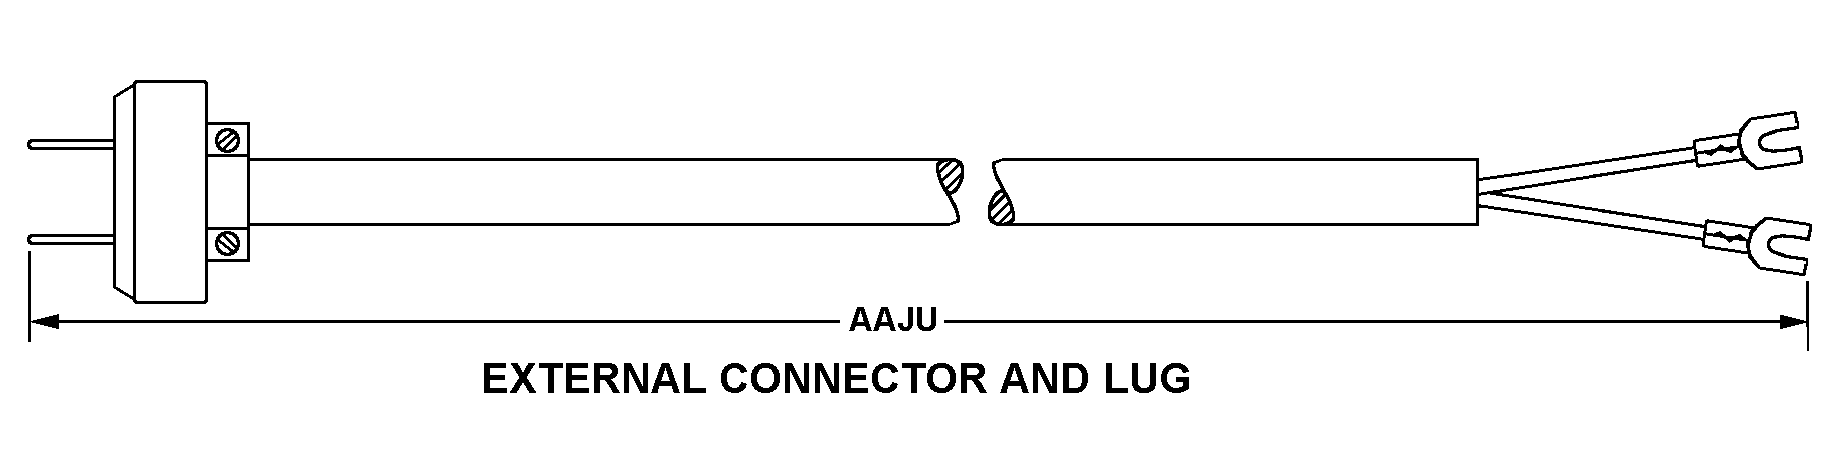 EXTERNAL CONNECTOR AND LUG style nsn 6150-01-243-9985